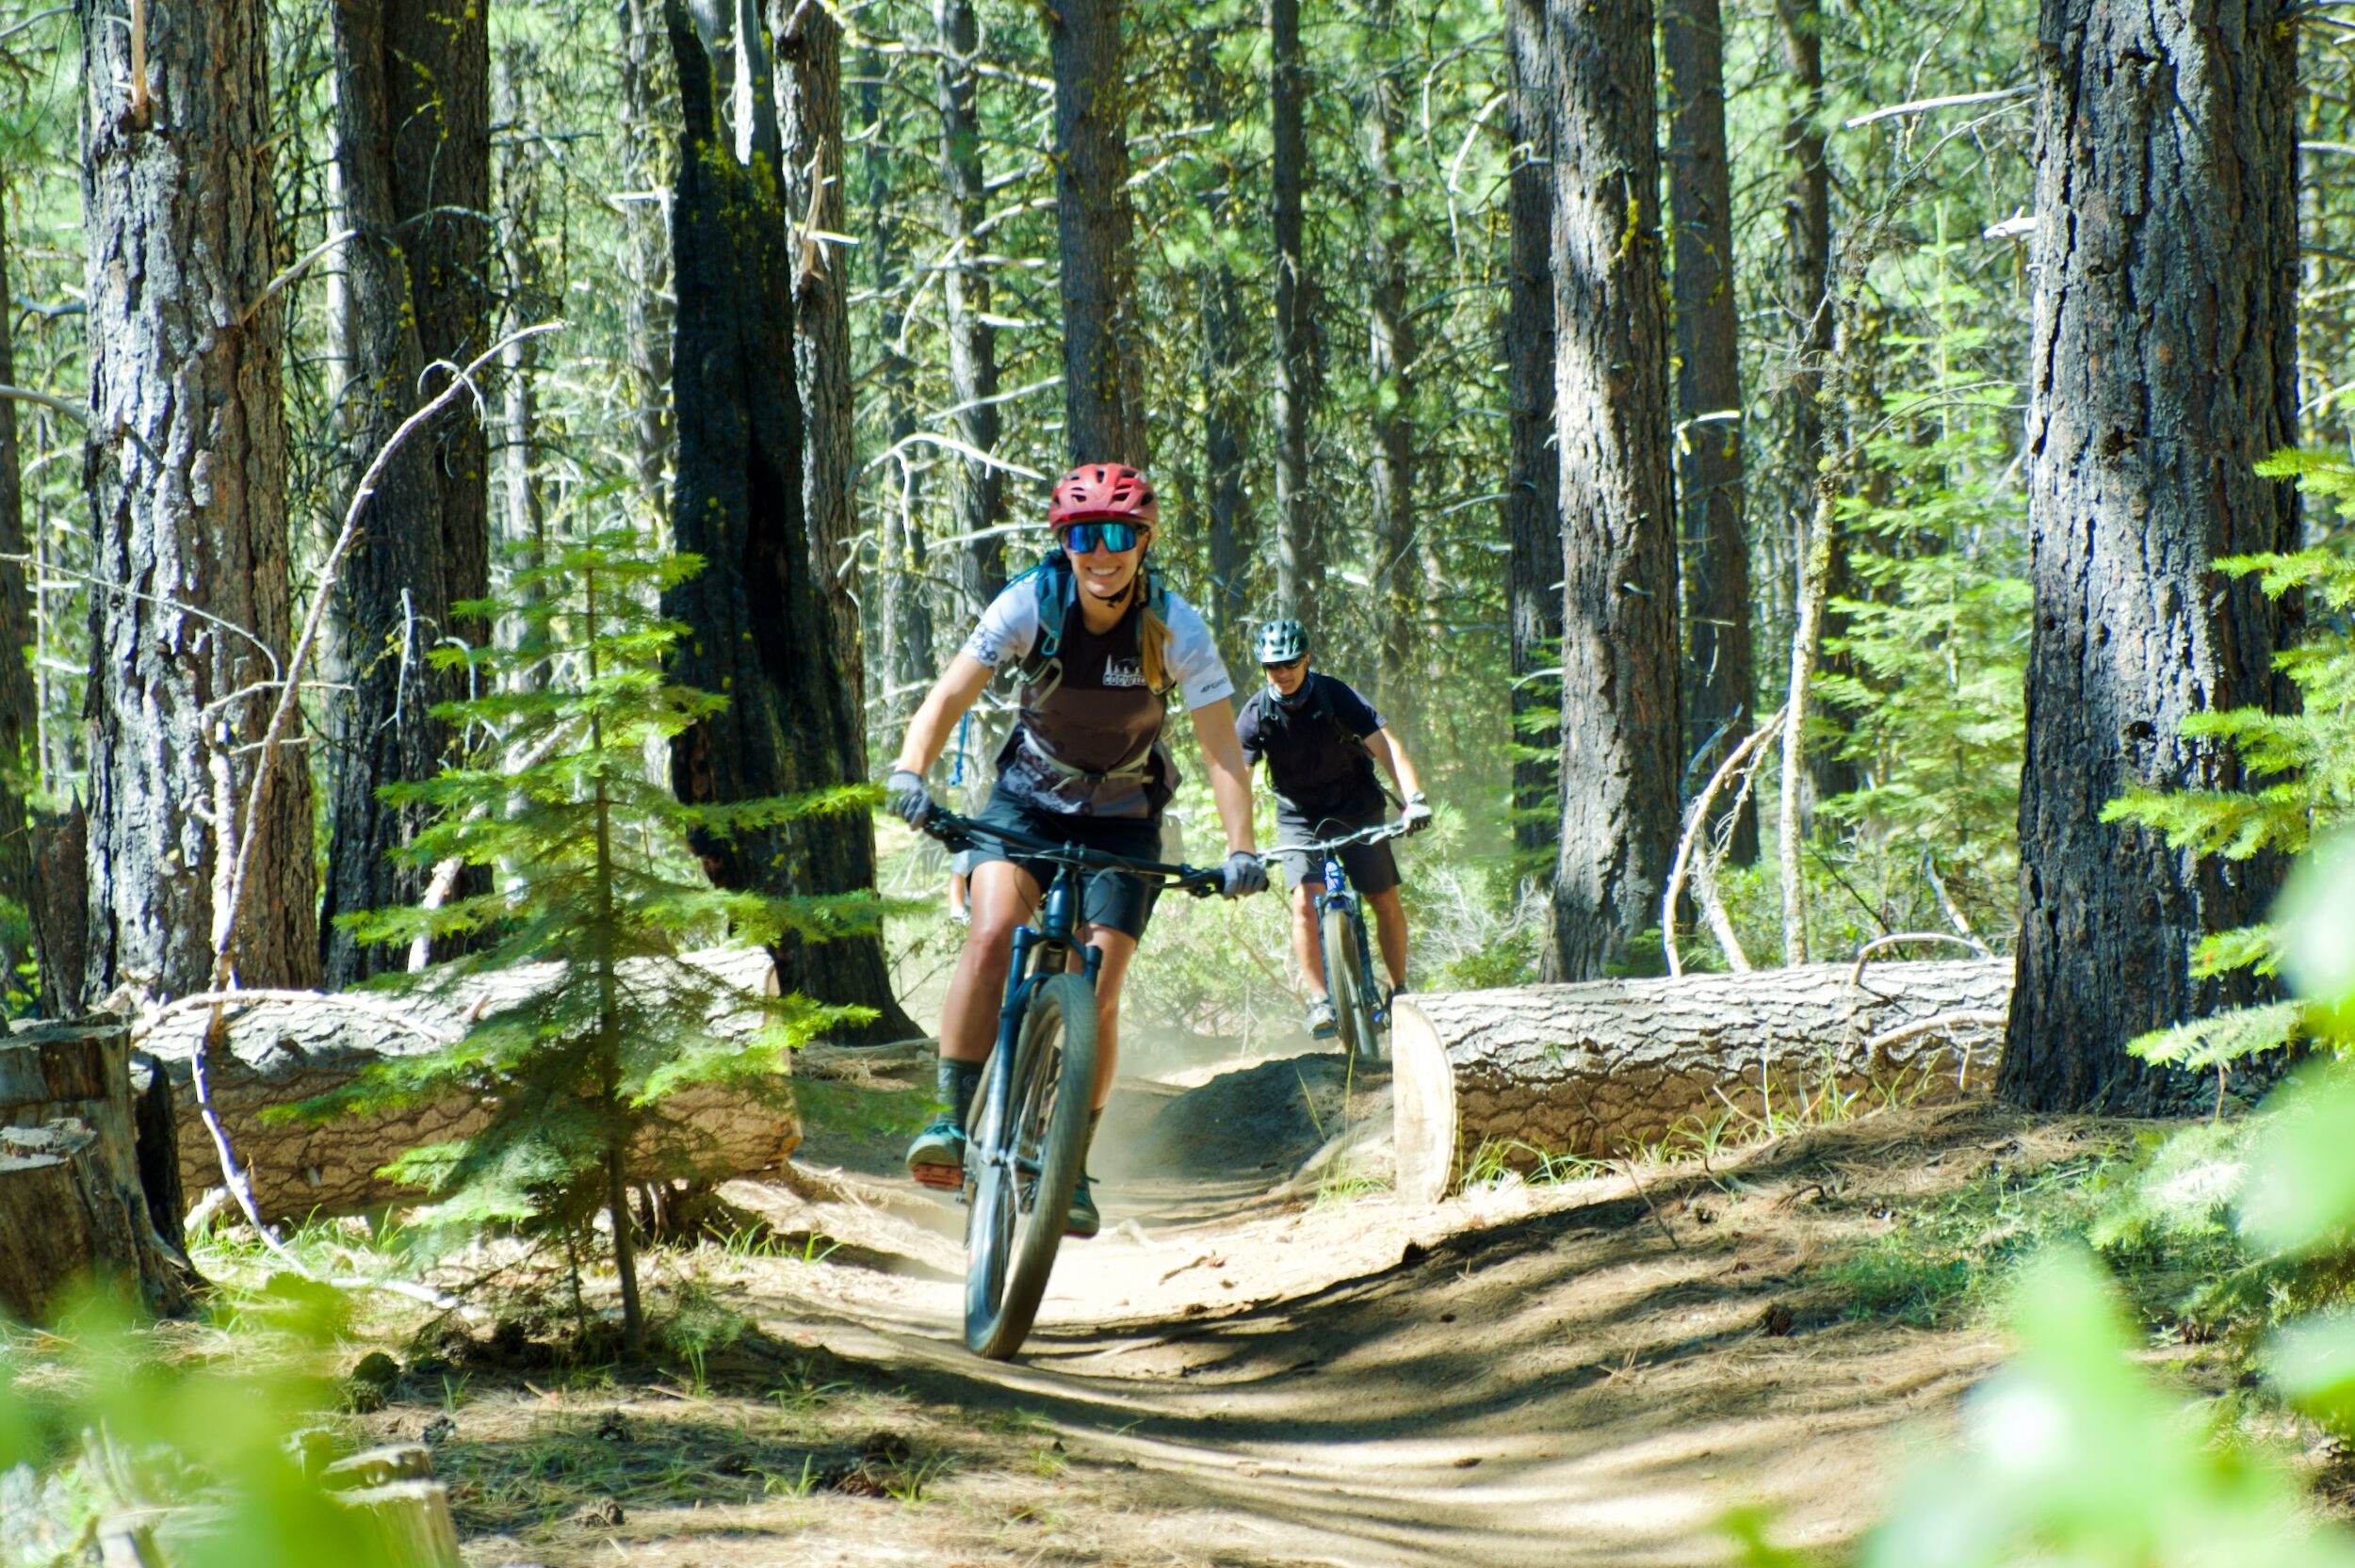 A mountain bike guide leads a client on a single track trail through the forest. 